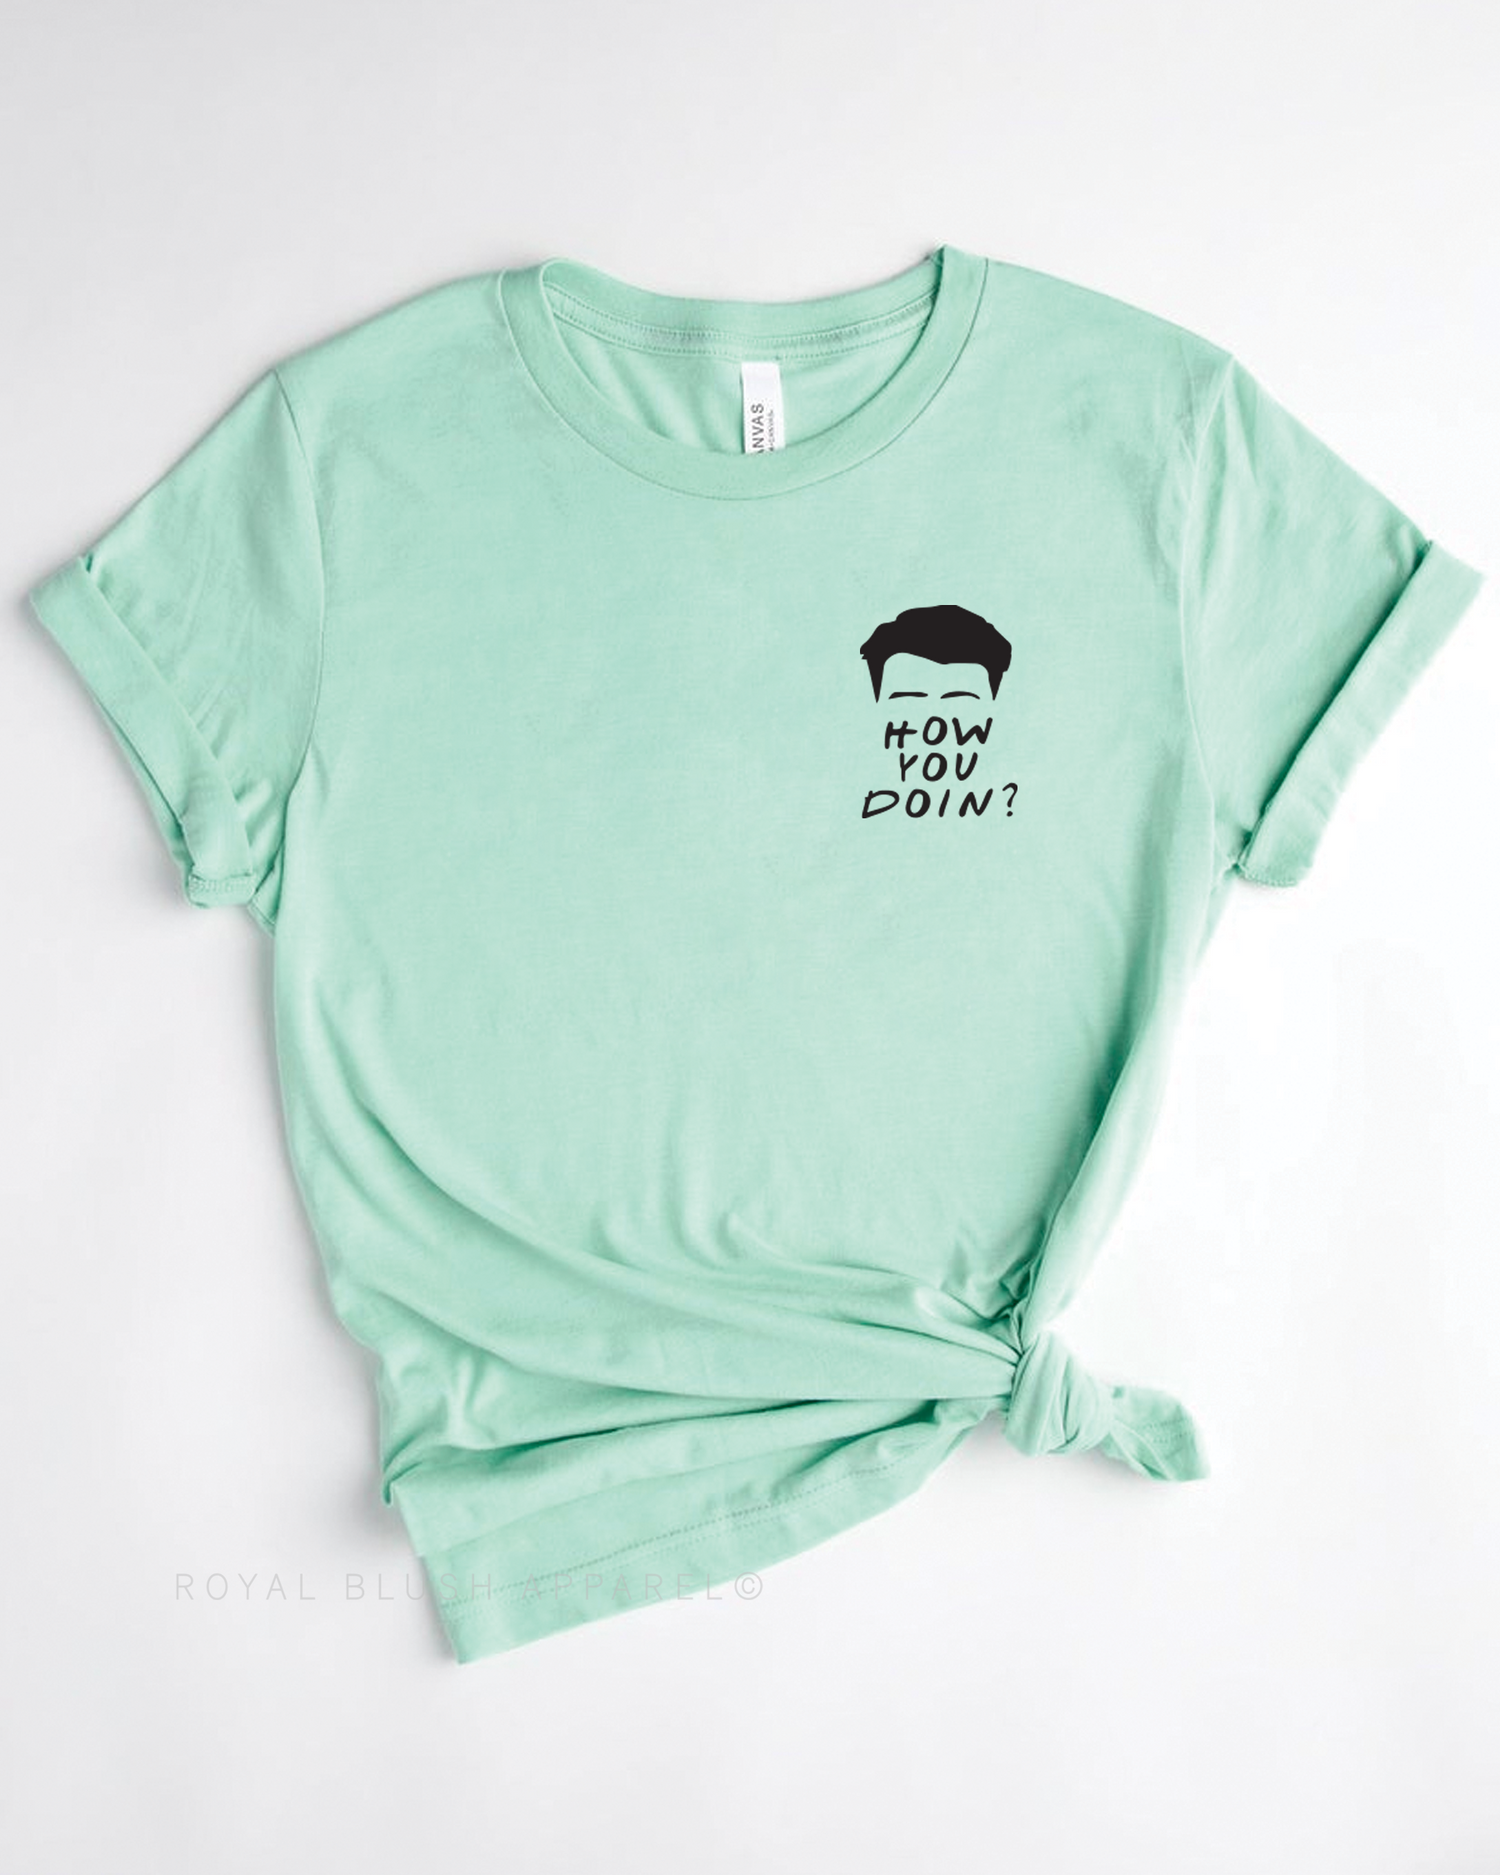 How You Doin? Relaxed Unisex T-shirt